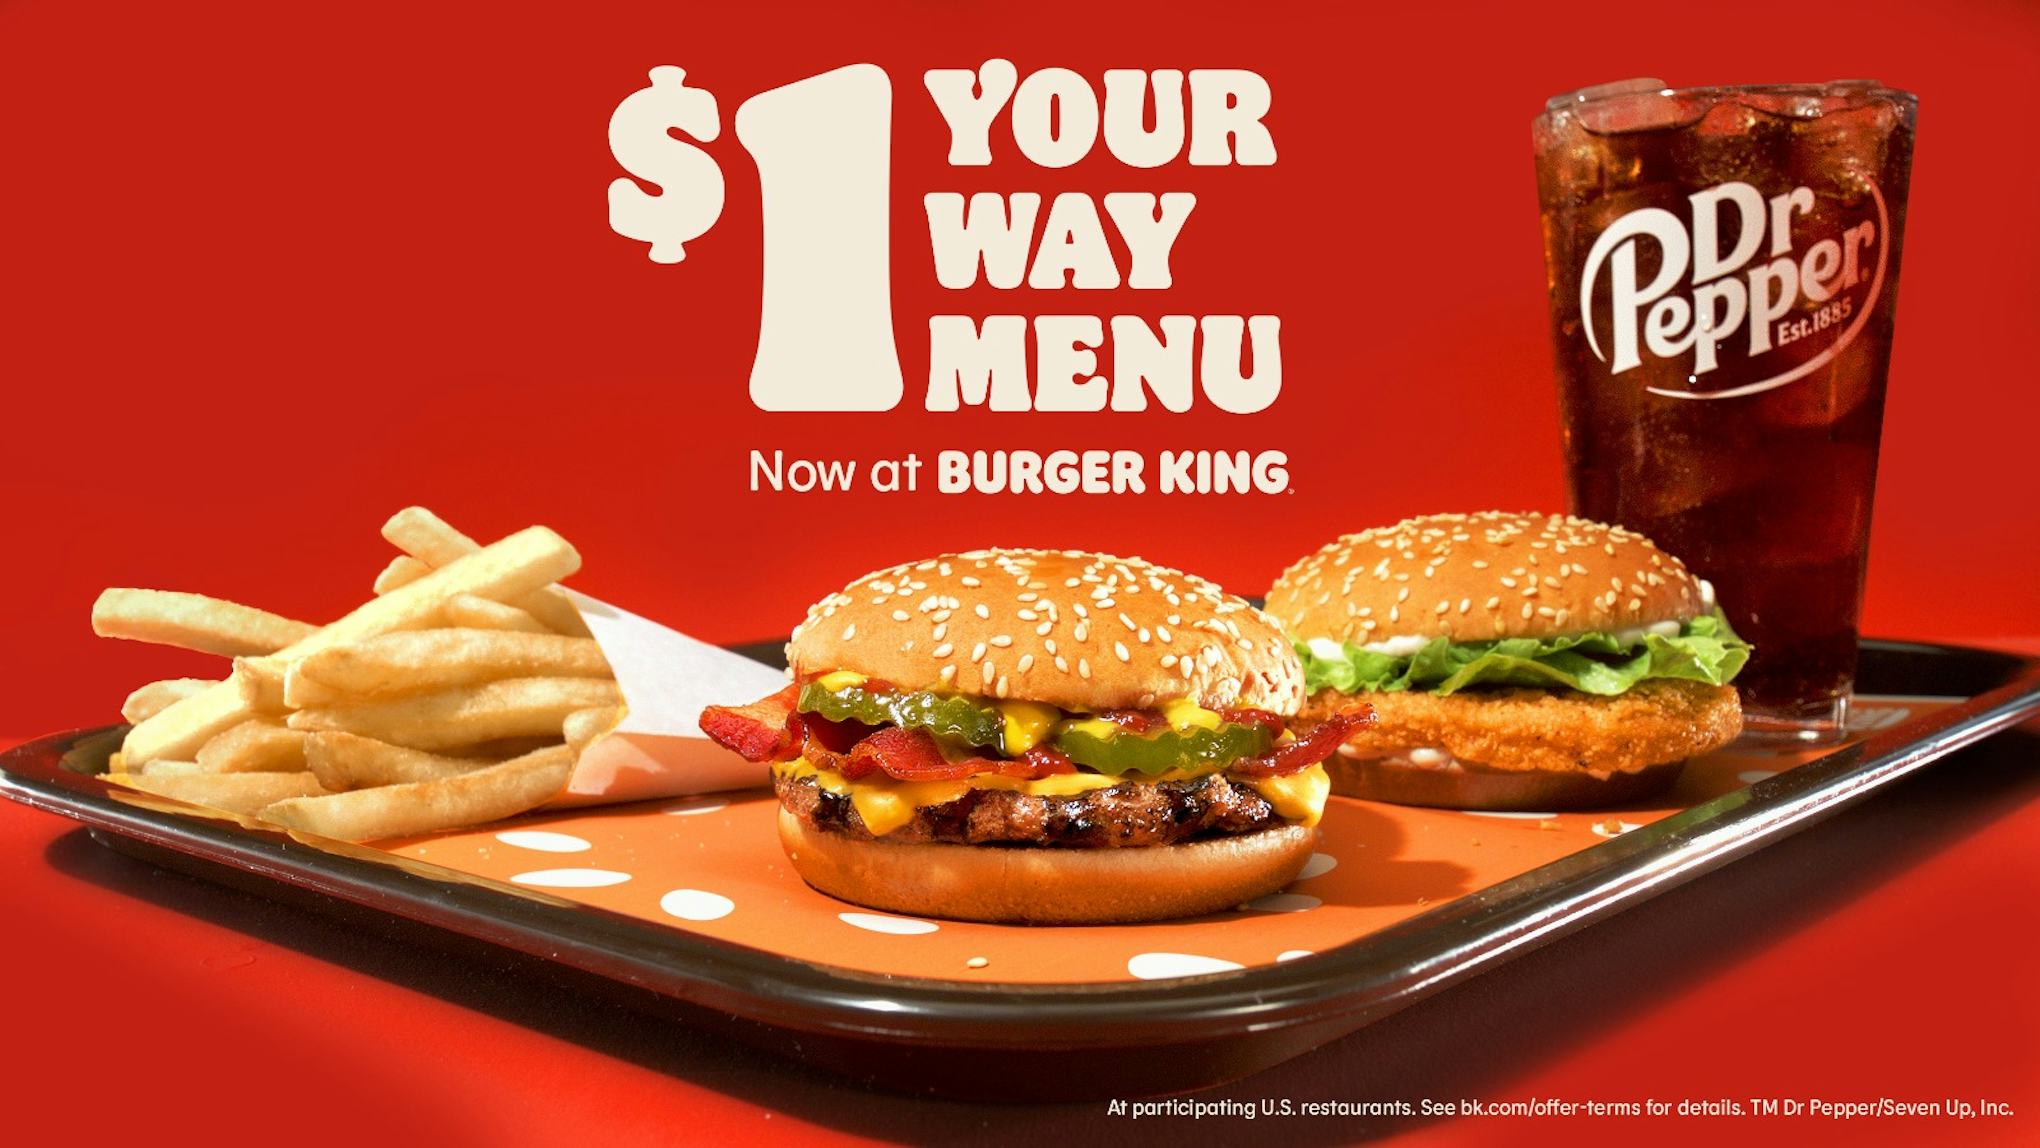 Burger King's New 1 Your Way Menu For 2021 Is Launching With A Tasty Promo